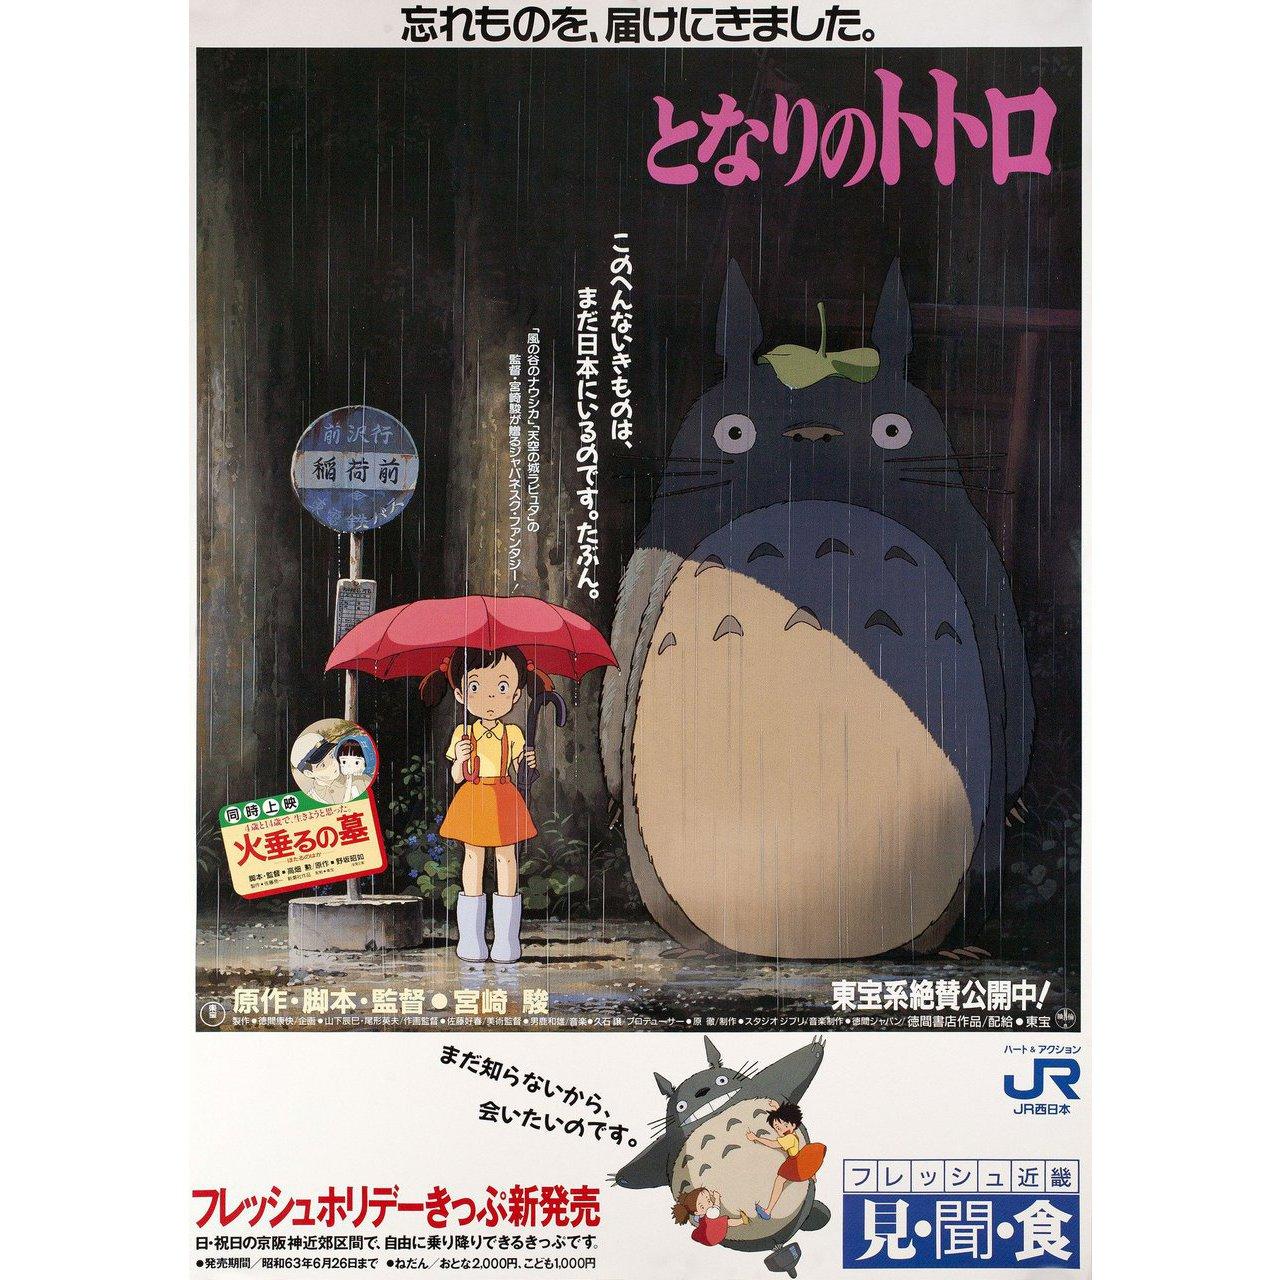 Original 1988 Japanese B1 poster for the film My Neighbor Totoro (Tonari no Totoro) directed by Hayao Miyazaki with Toshiyuki Amagasa / Paul Butcher / Pat Carroll / Cheryl Chase. Fine condition, rolled. Please note: The size is stated in inches and